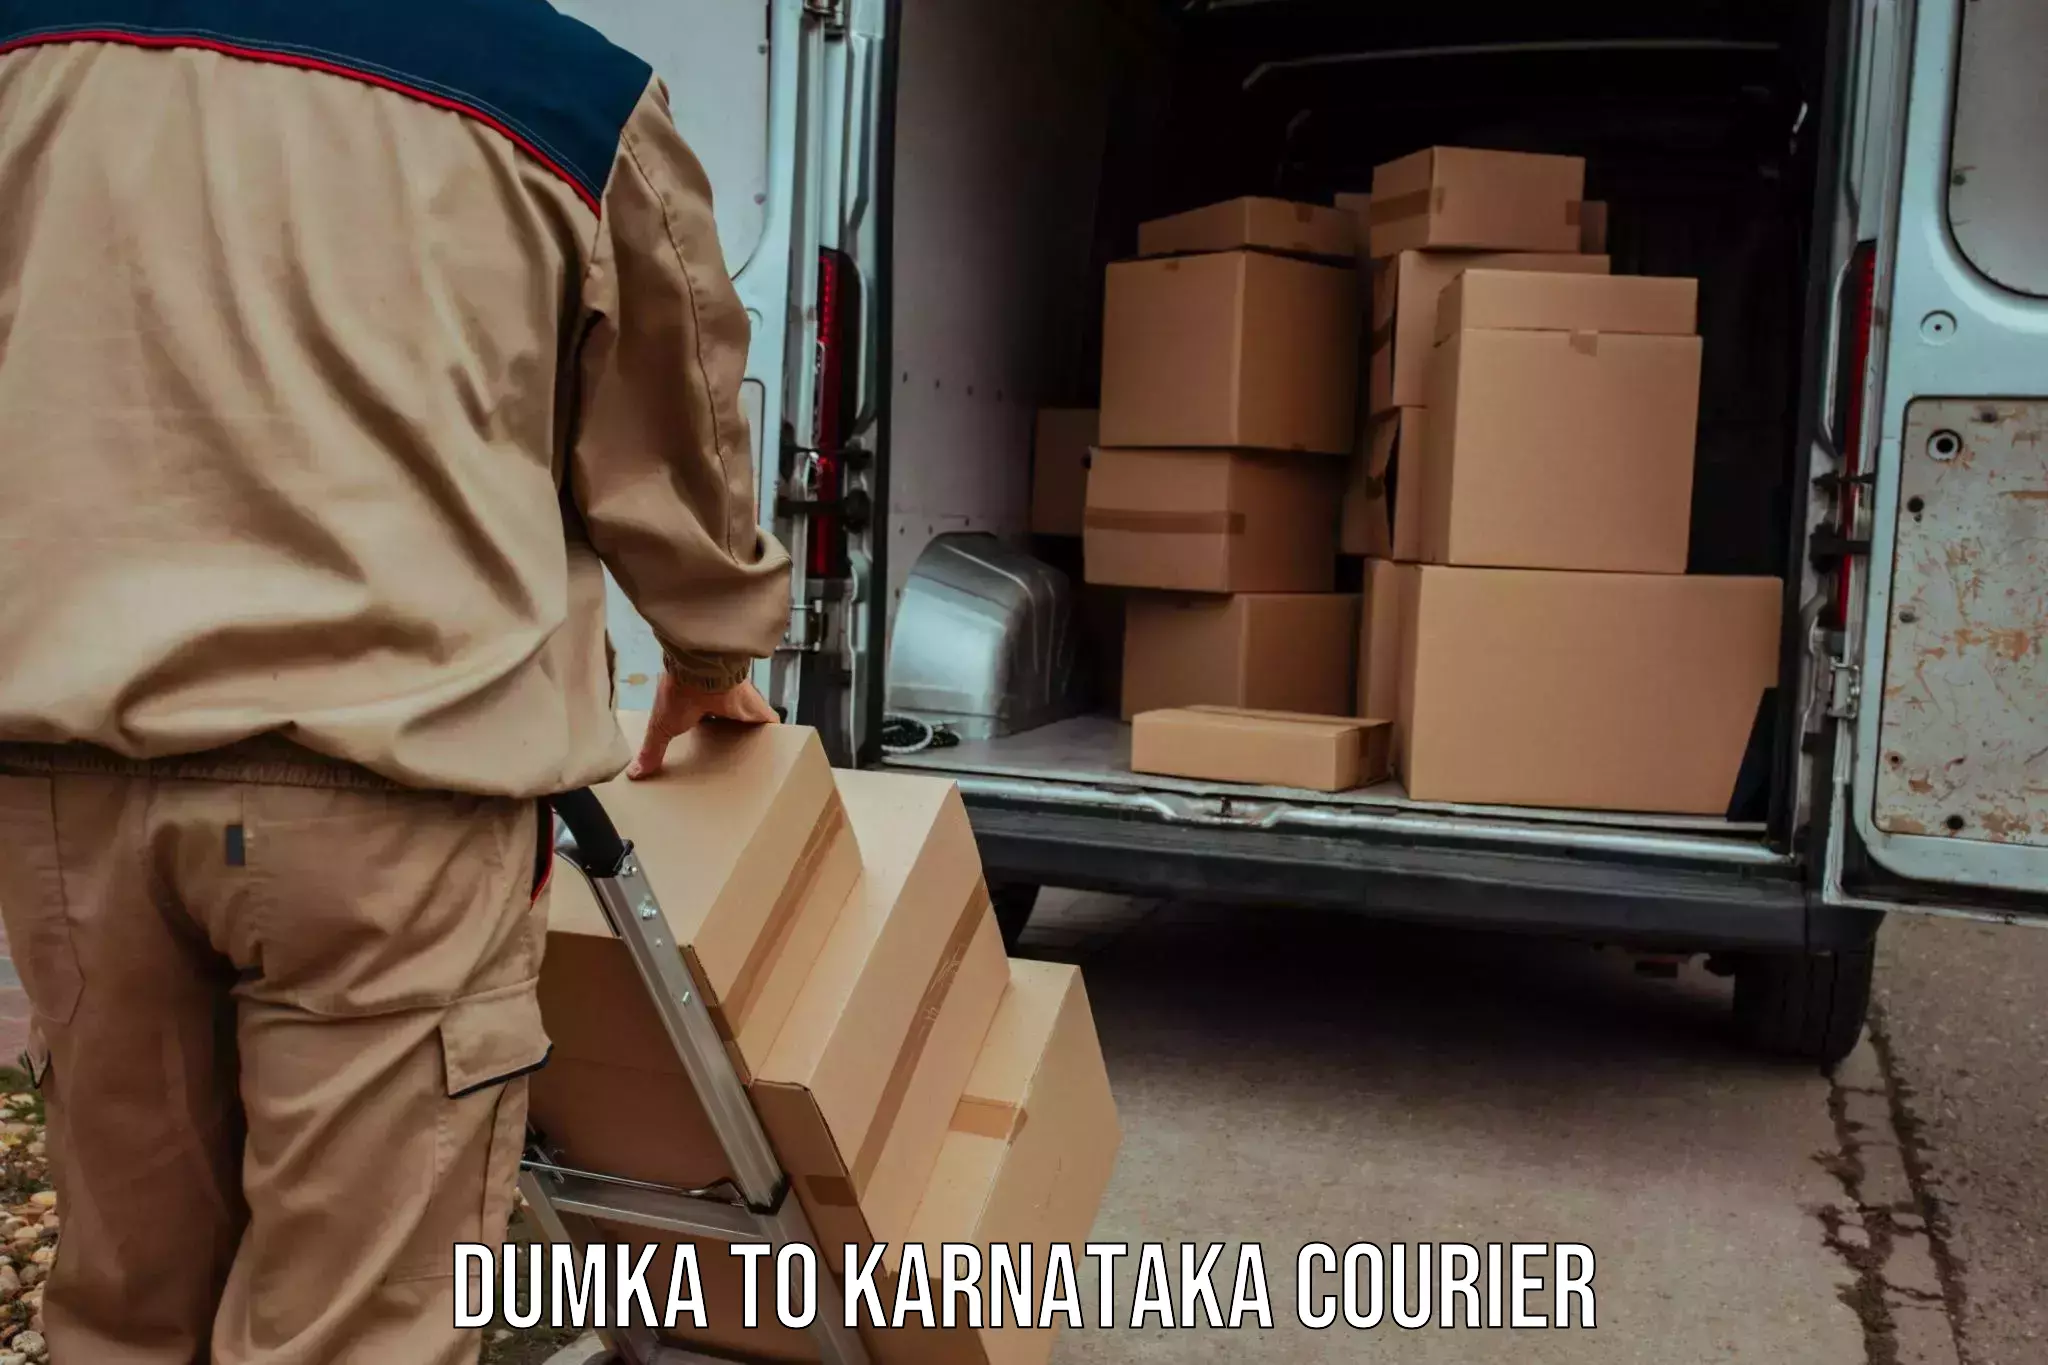 State-of-the-art courier technology Dumka to Vitla